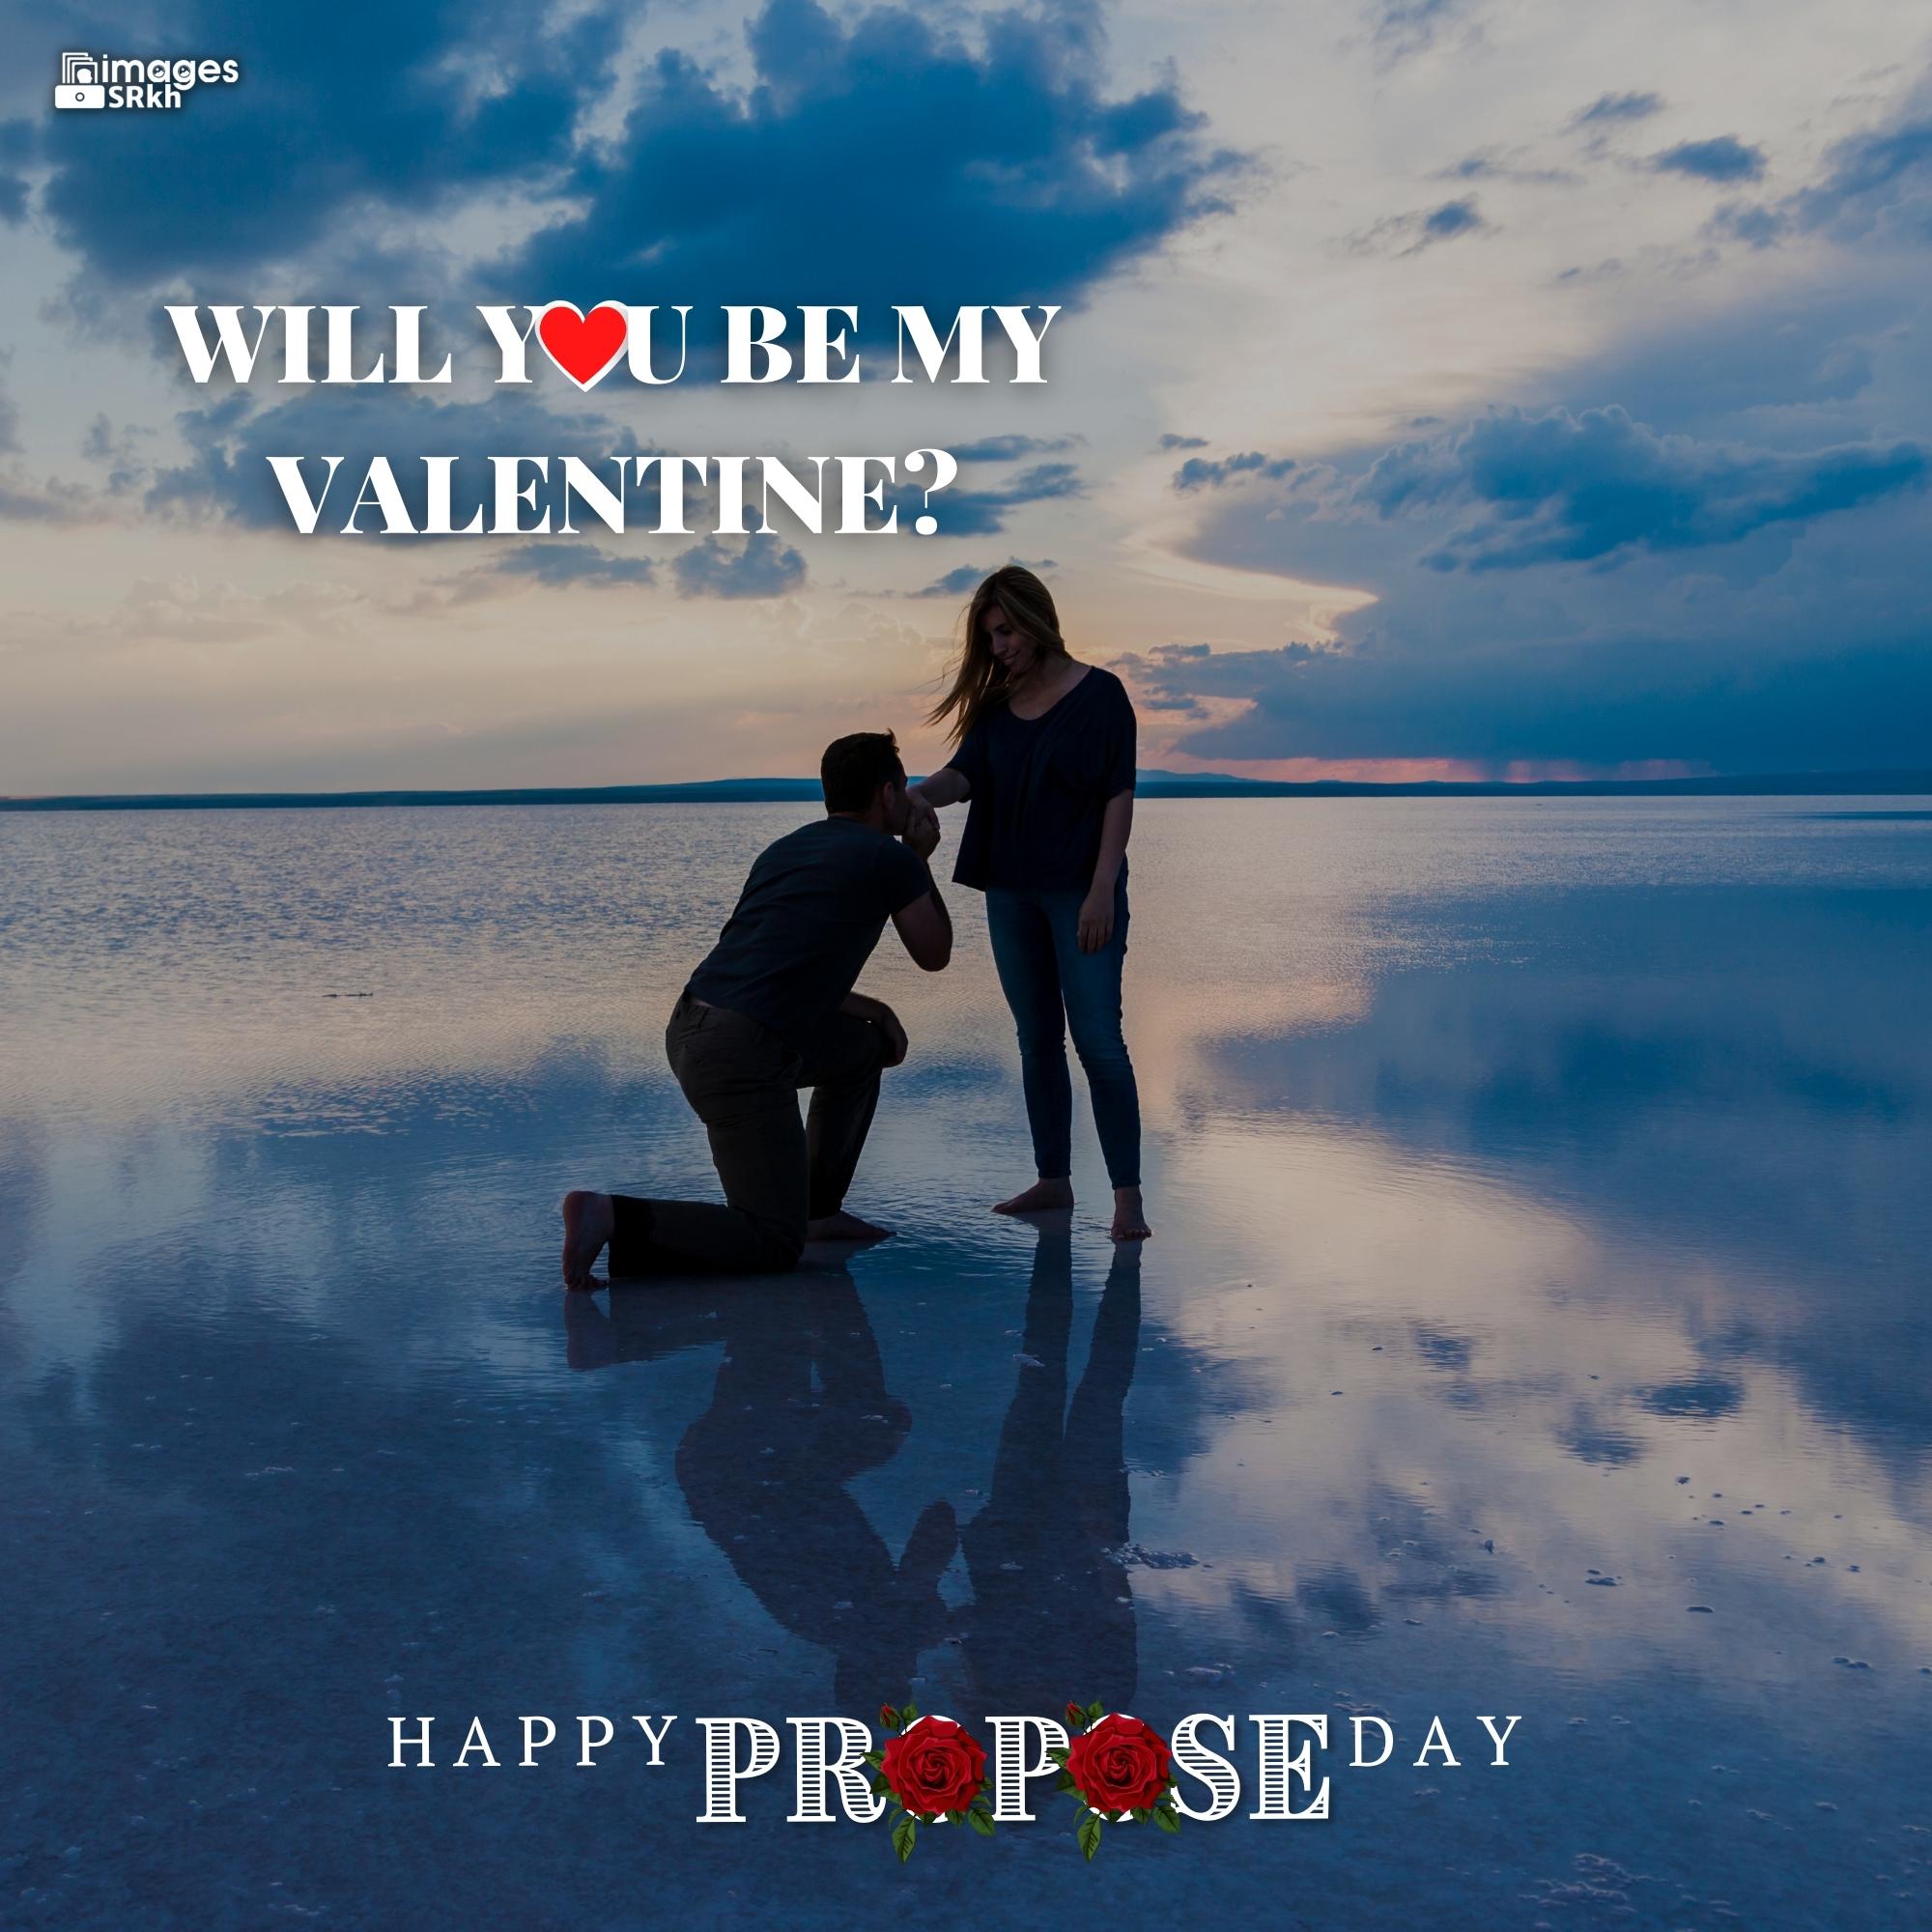 Propose Day Images | 252 | Will You Be My Valentine